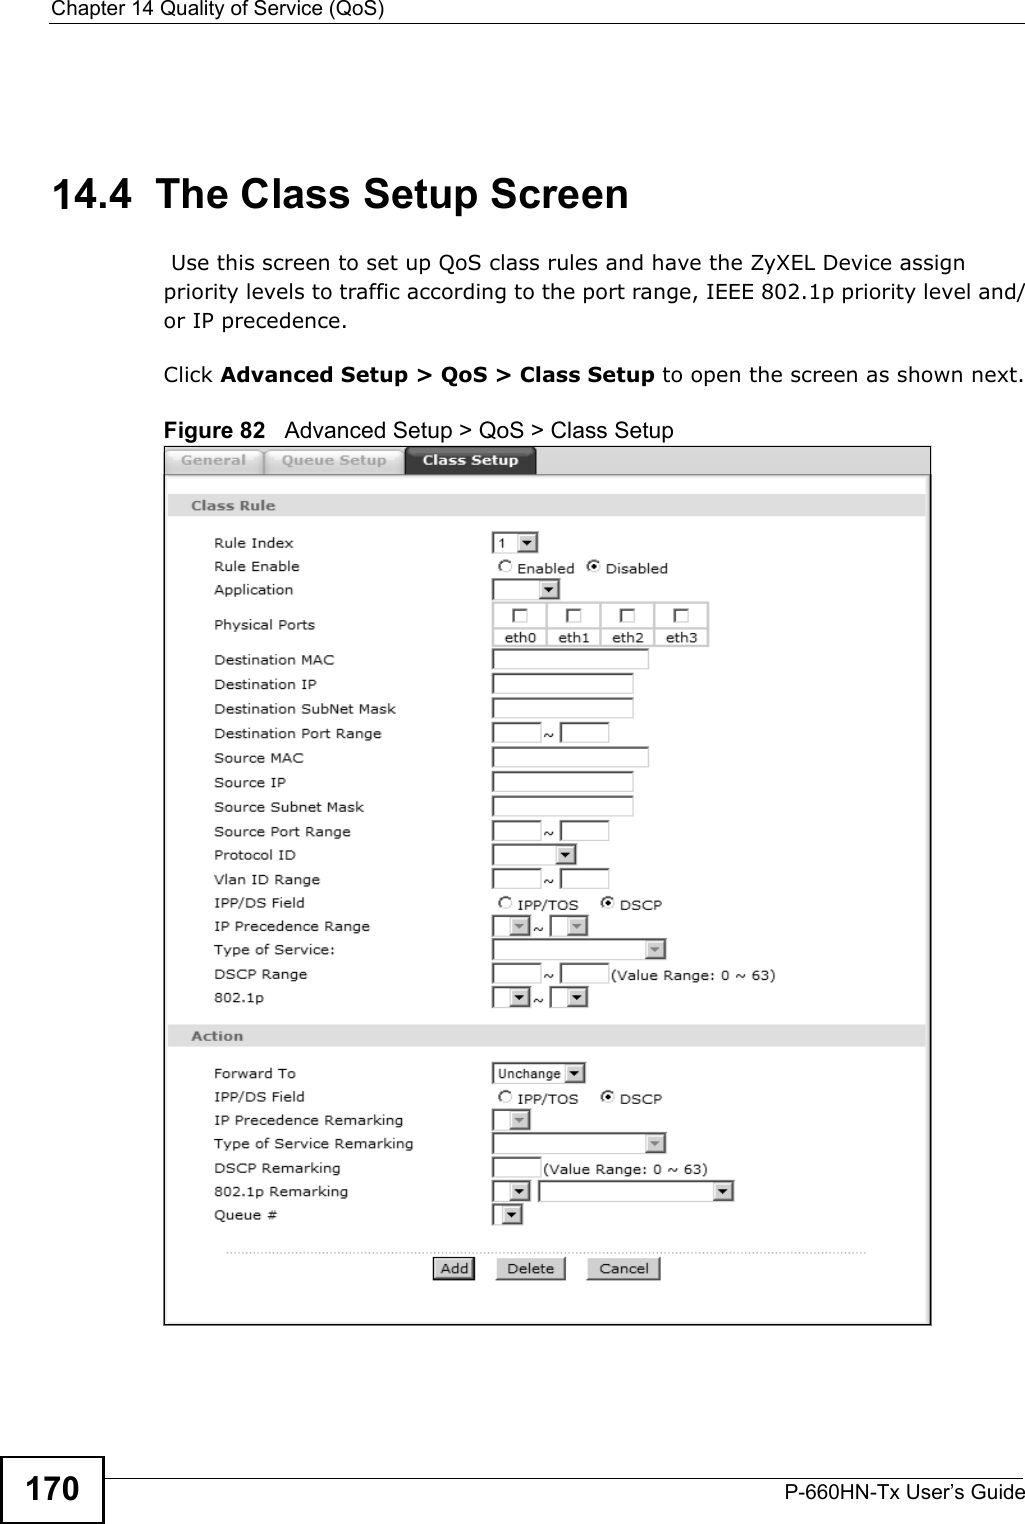 Chapter 14 Quality of Service (QoS)P-660HN-Tx User’s Guide17014.4  The Class Setup Screen  Use this screen to set up QoS class rules and have the ZyXEL Device assign priority levels to traffic according to the port range, IEEE 802.1p priority level and/or IP precedence.Click Advanced Setup &gt; QoS &gt; Class Setup to open the screen as shown next.Figure 82   Advanced Setup &gt; QoS &gt; Class Setup